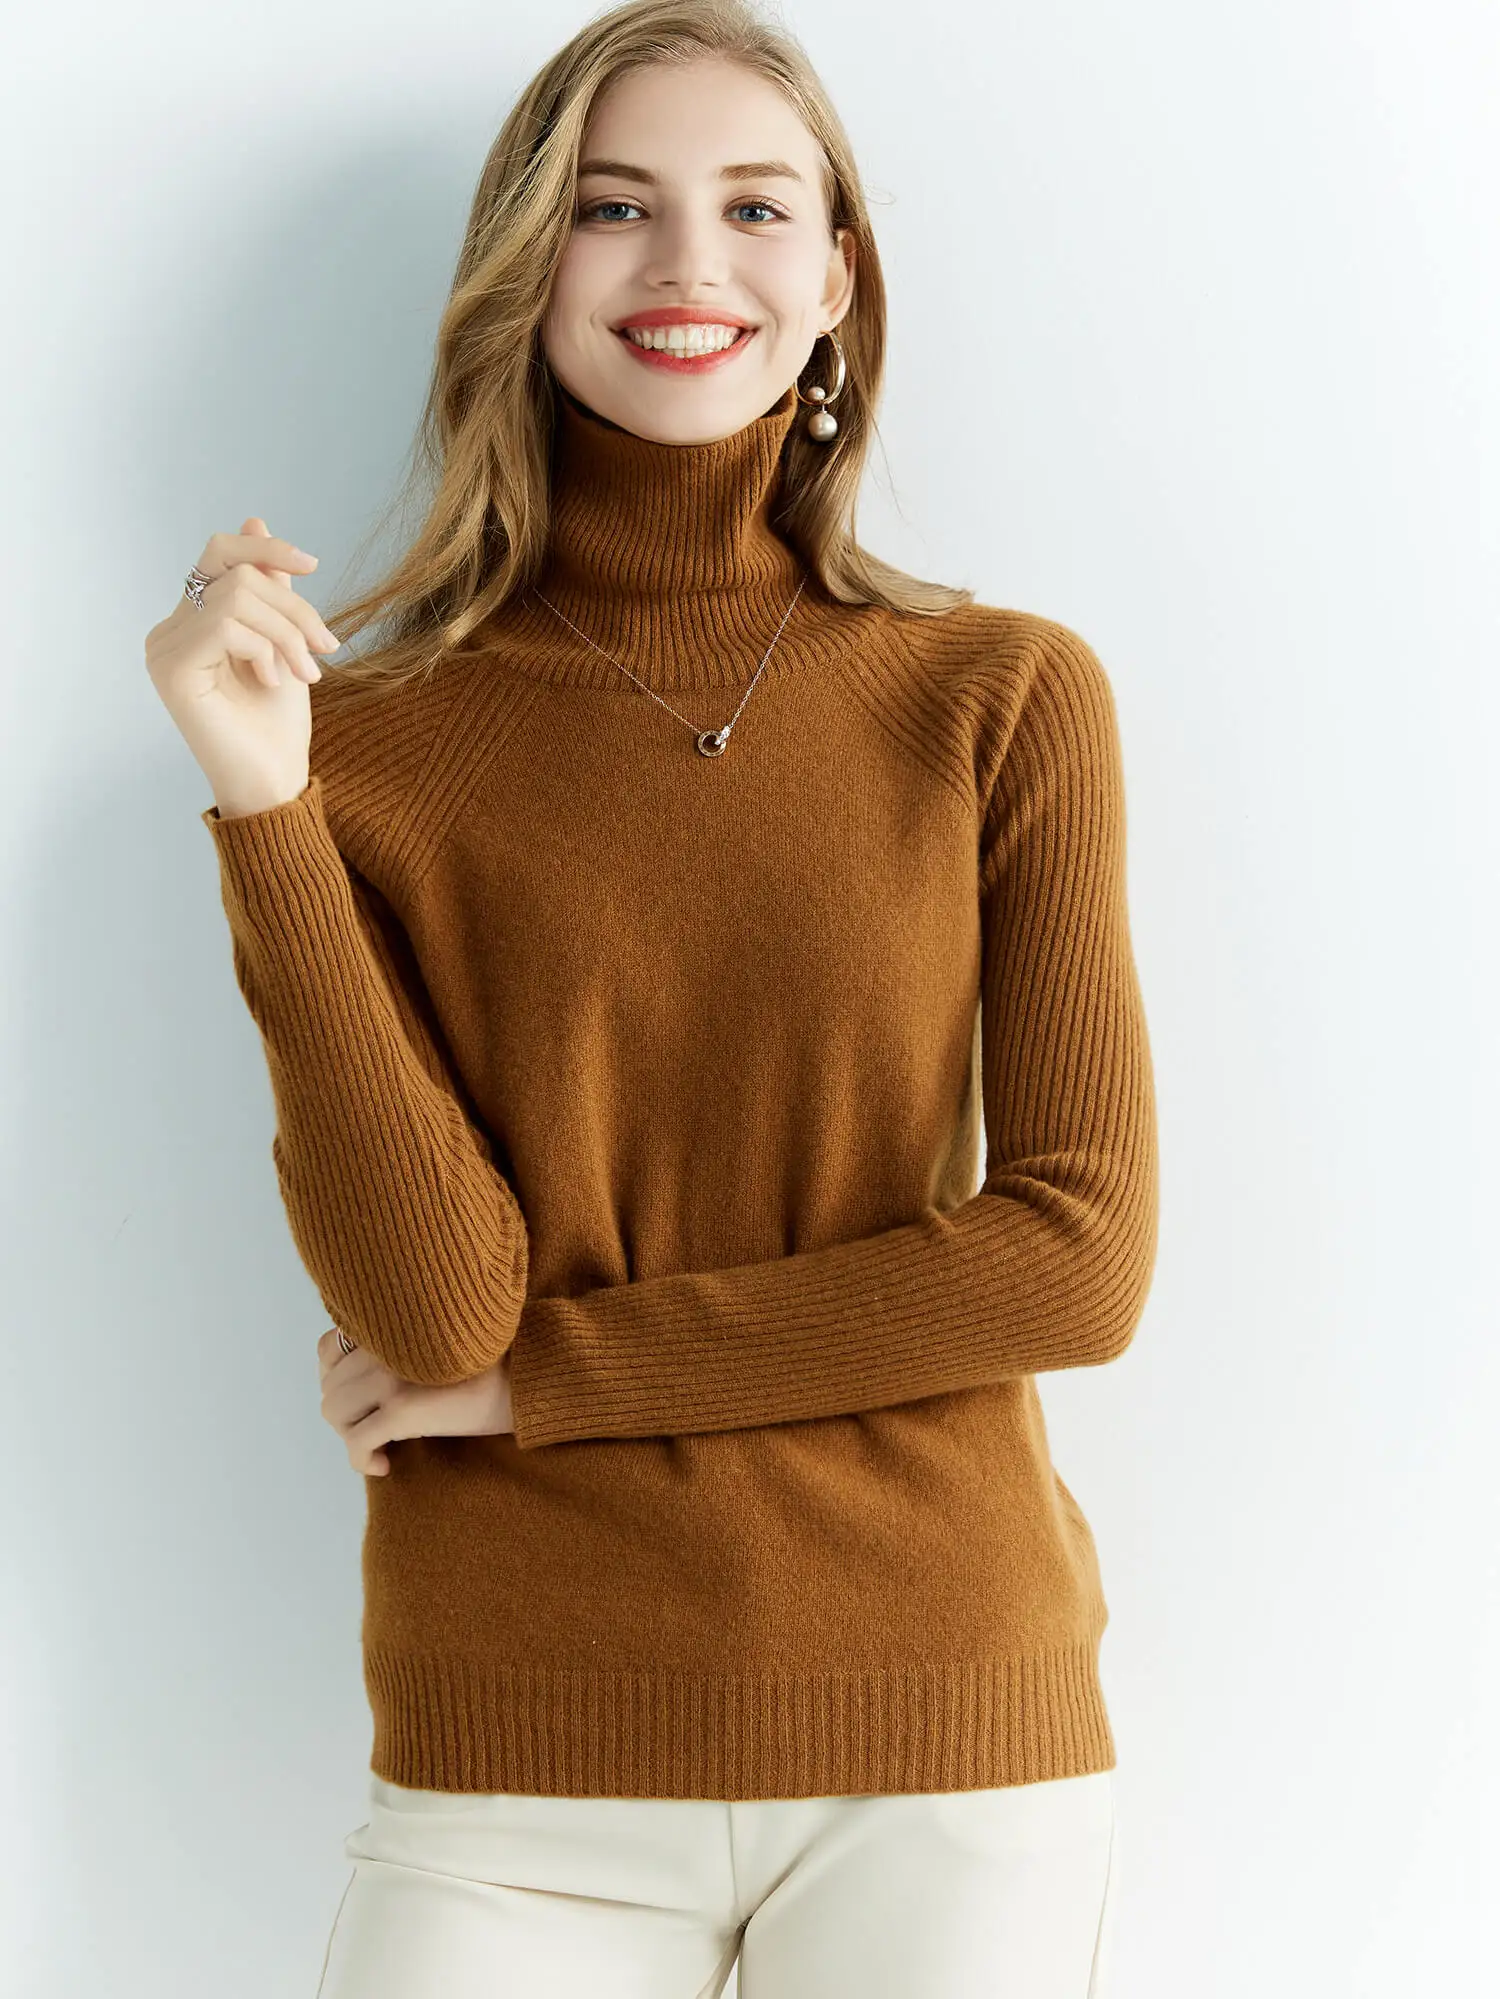 Cashmere Sweater Women's Knitted Sweaters 100% Merino Wool Turtleneck Long Sleeve Pullover Autumn Winter Clothes Vintage Jumpers